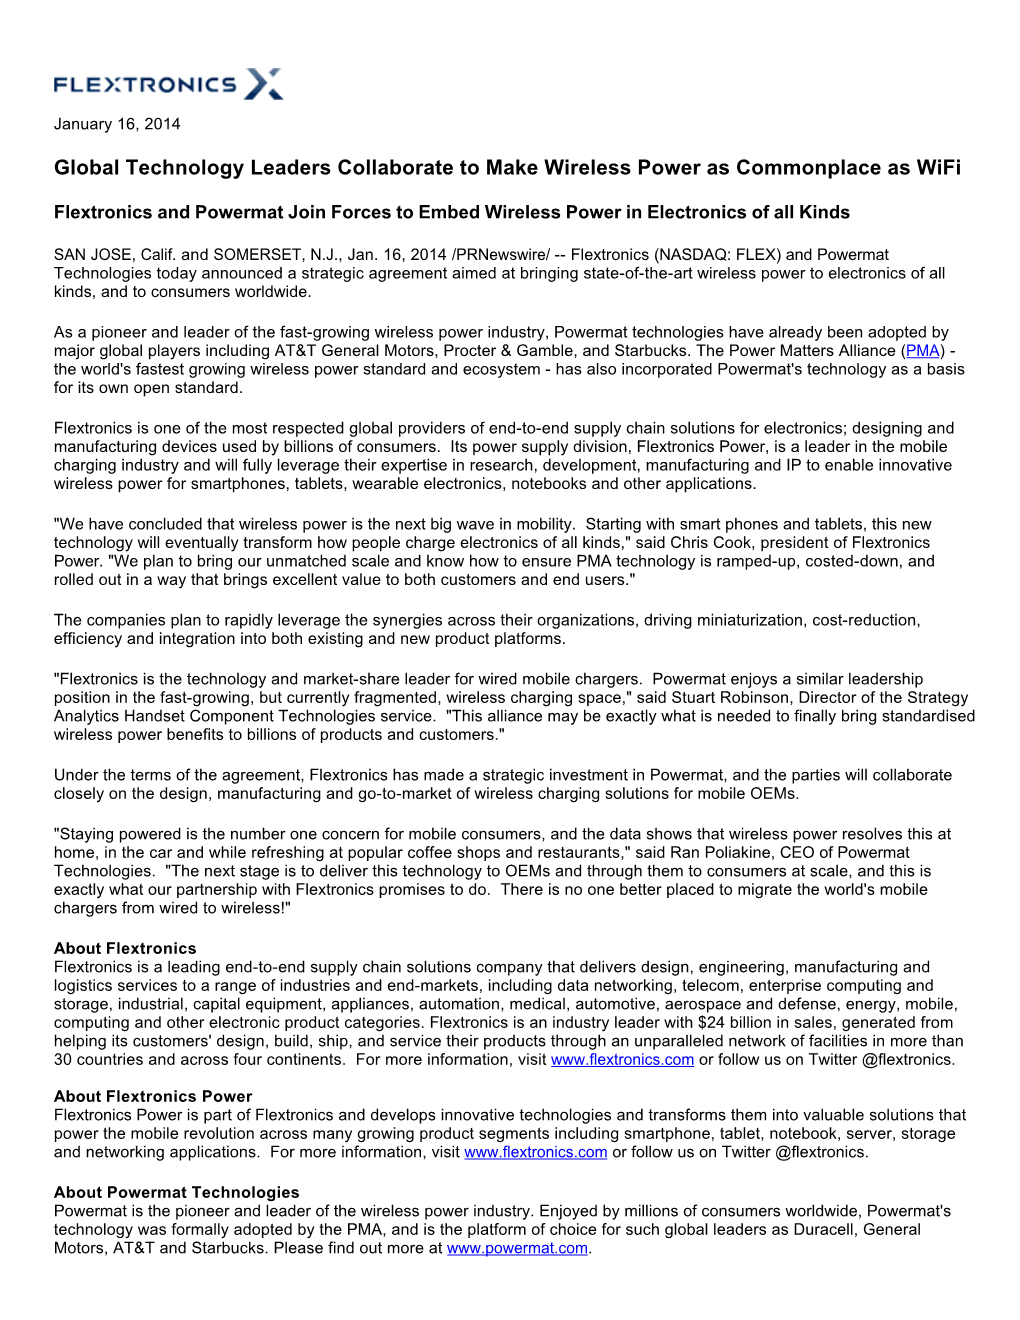 Global Technology Leaders Collaborate to Make Wireless Power As Commonplace As Wifi